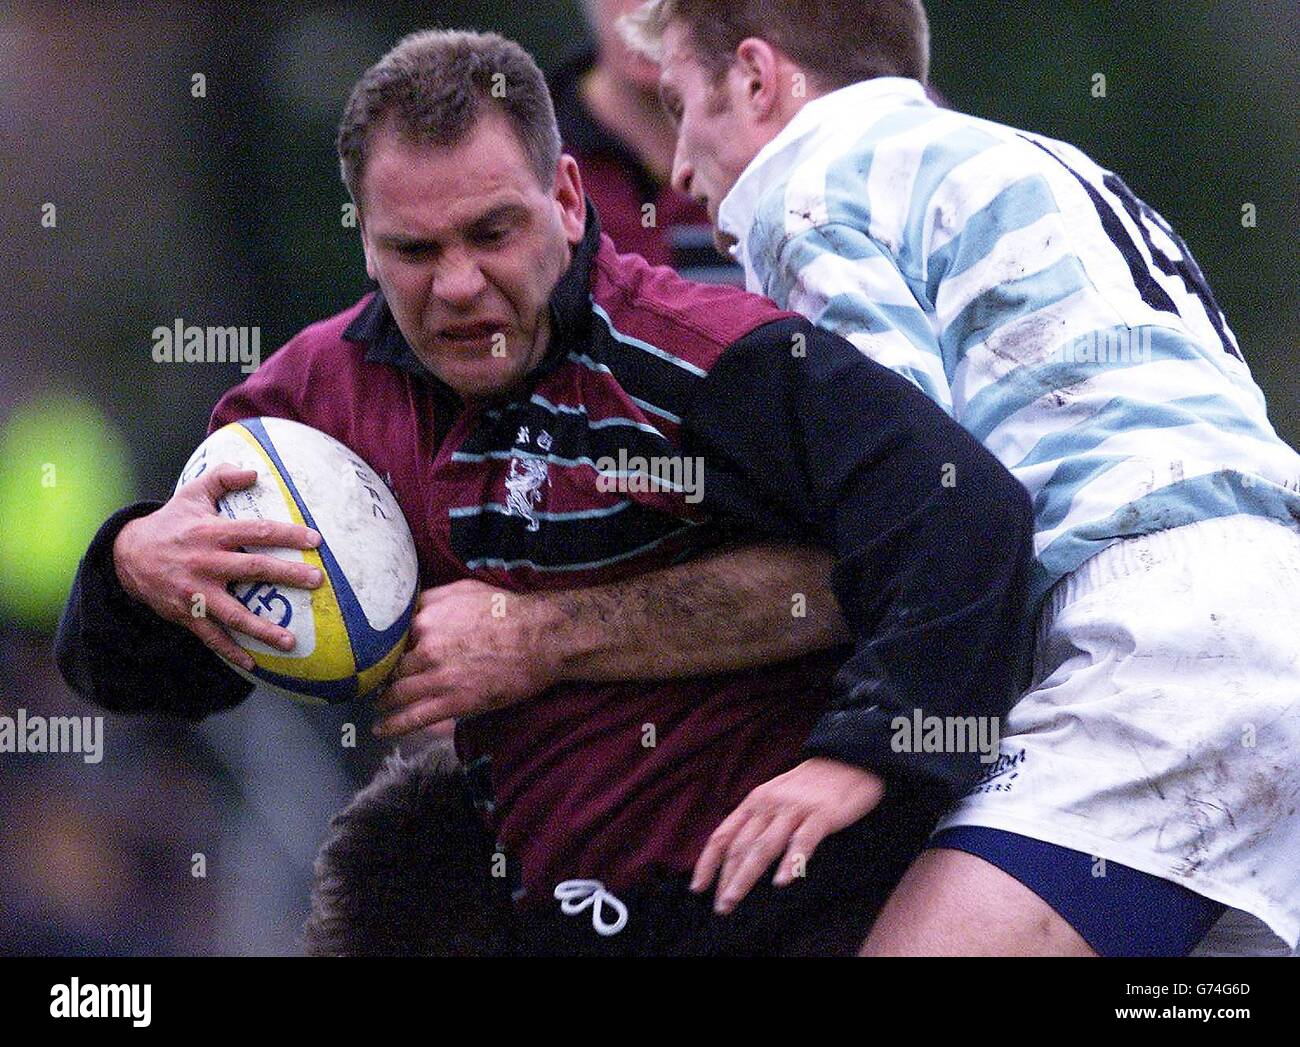 Cambridge University's Stuart Moffat (right) tackles Steele-Bodger's Greg Botterman during the 54th annual game between Cambridge University and Steele-Bodger at Grange Rd , Cambridge. * The Steele-Bodger side consists of professional Rugby Union players and competes with the Cambridge University team on an annual basis. Stock Photo